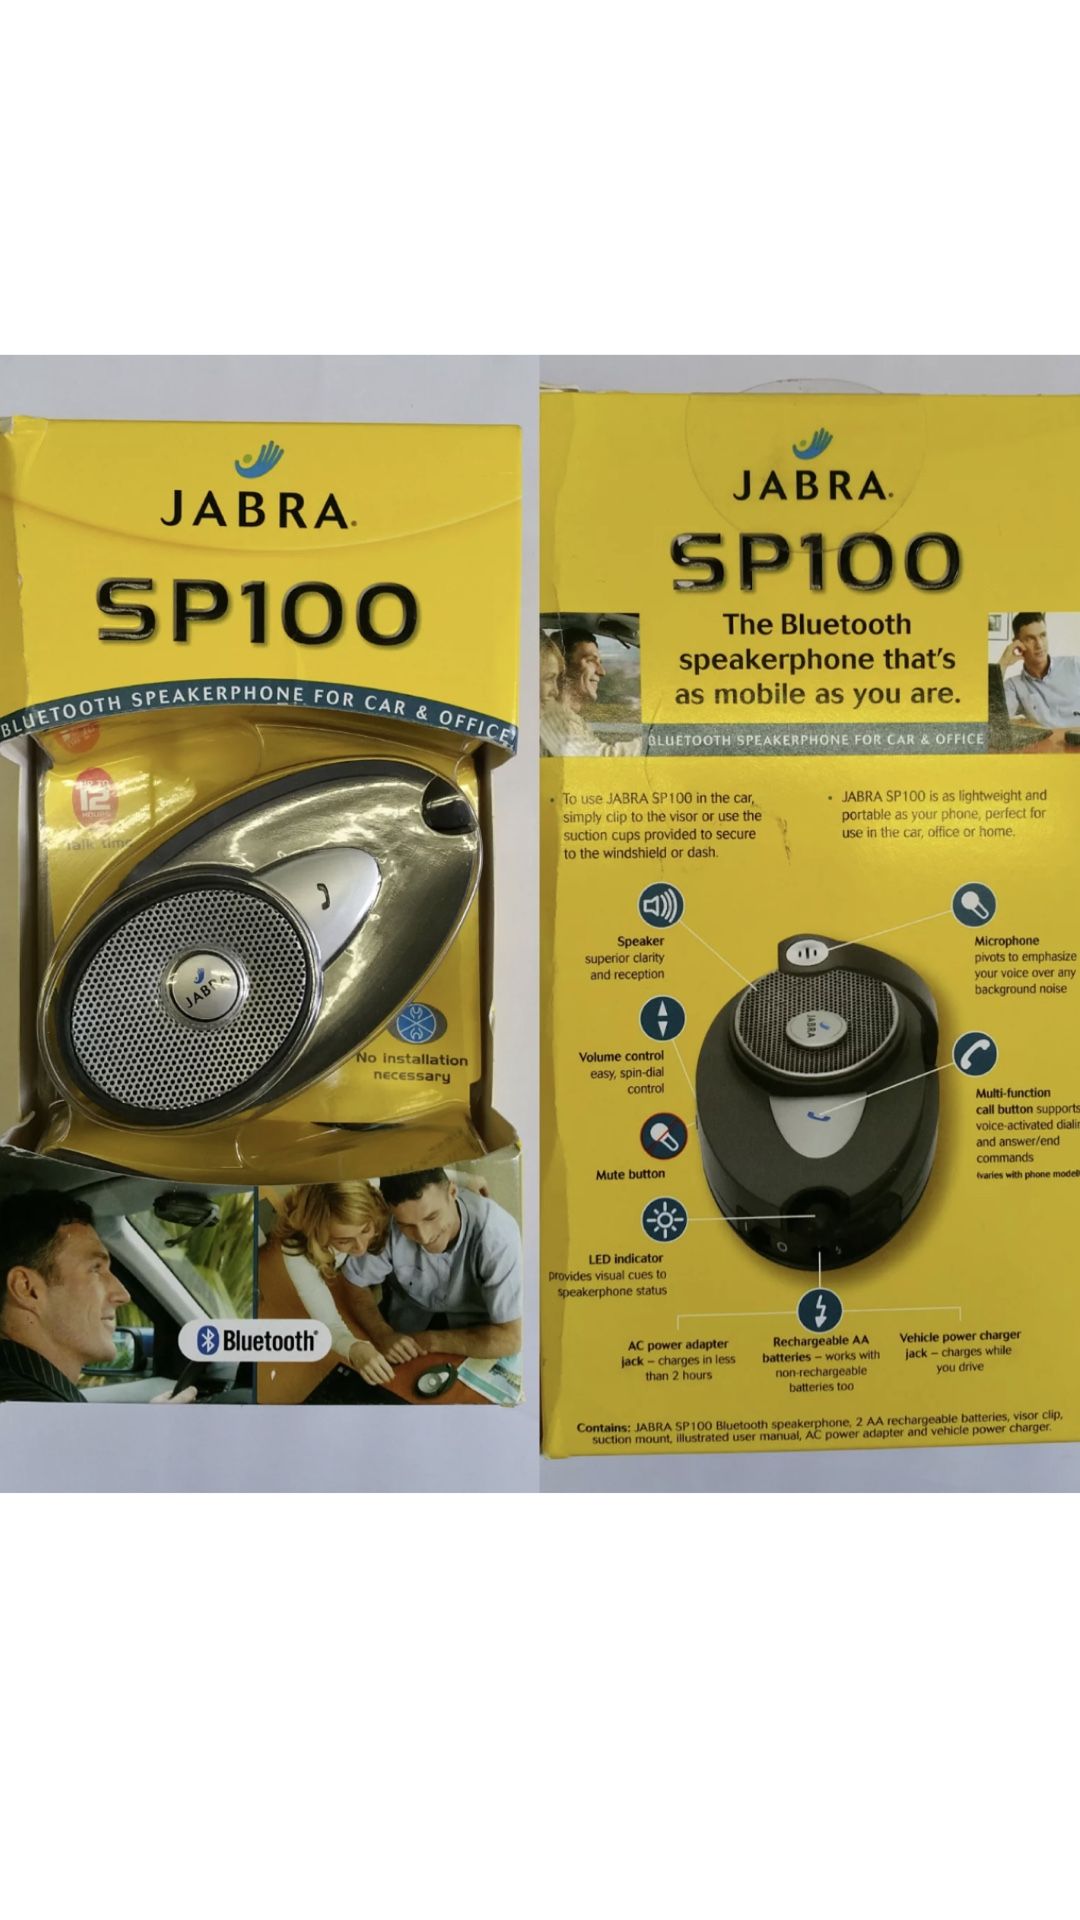 Like New Jabra SP100 Bluetooth Speakerphone for Car & Office W/Multi-Function call Button